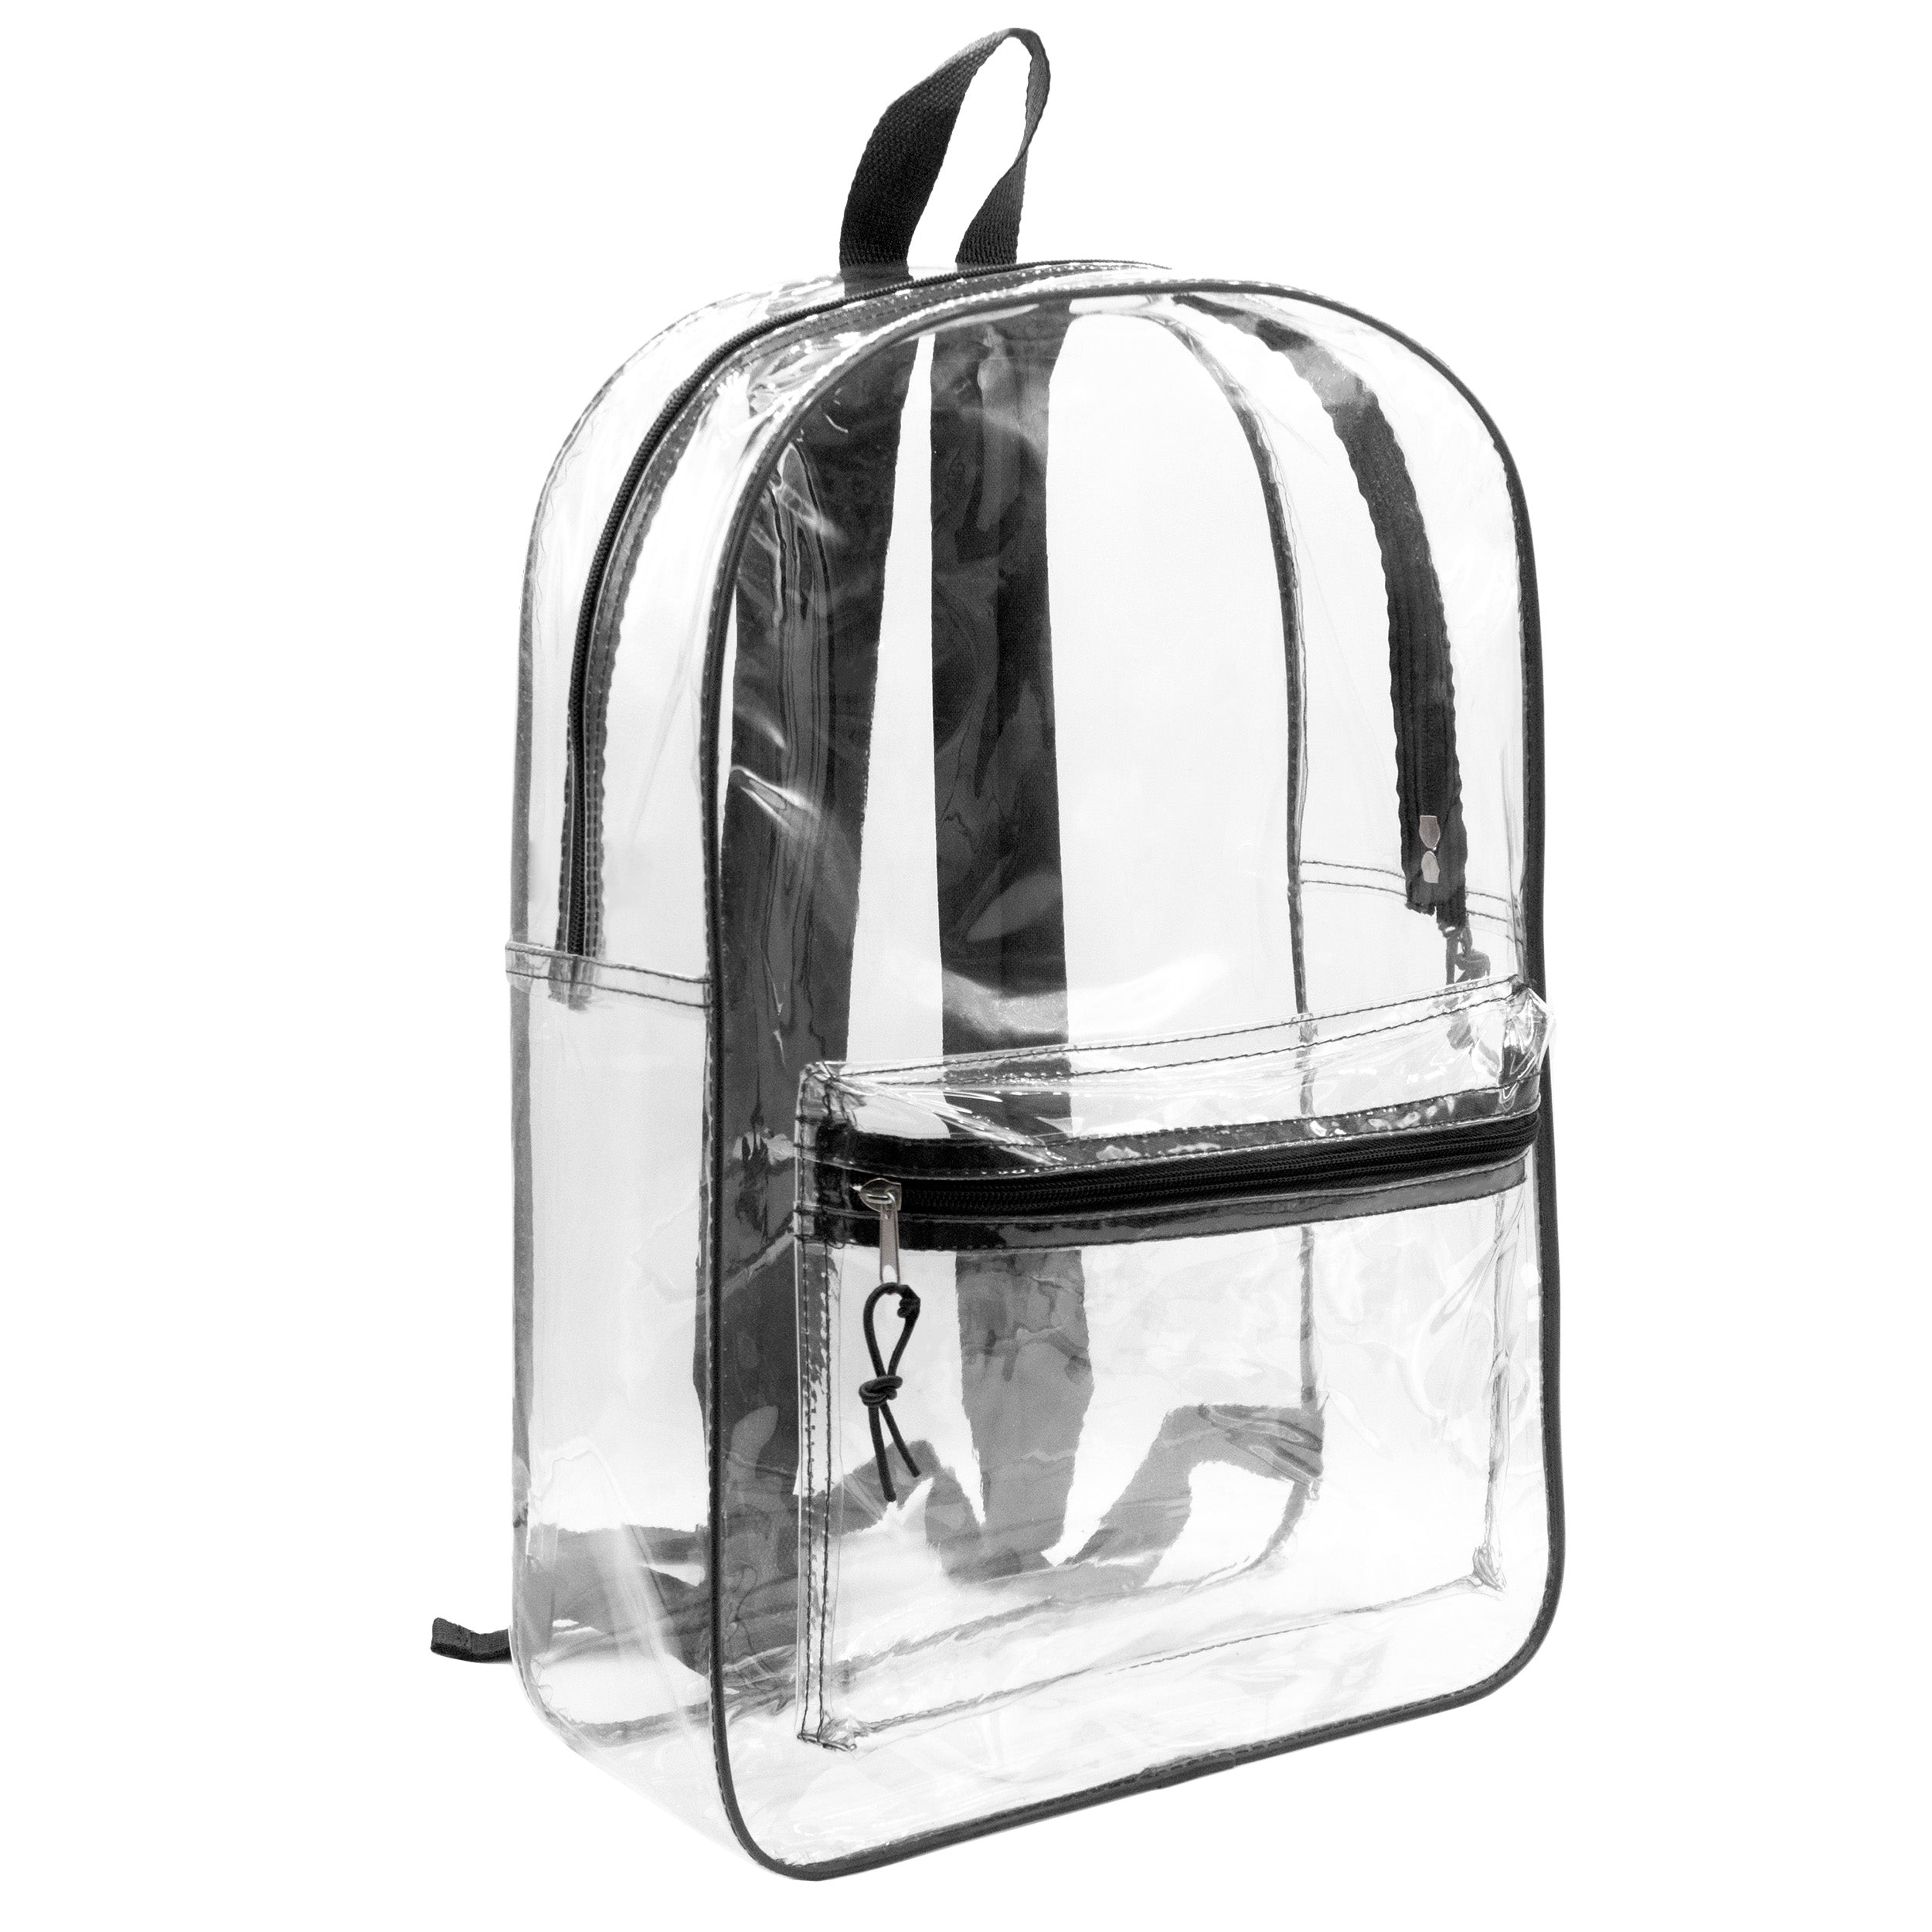 Copy of 17" Clear Vinyl Backpacks With Assorted Color Piping - Wholesale Kit of 12